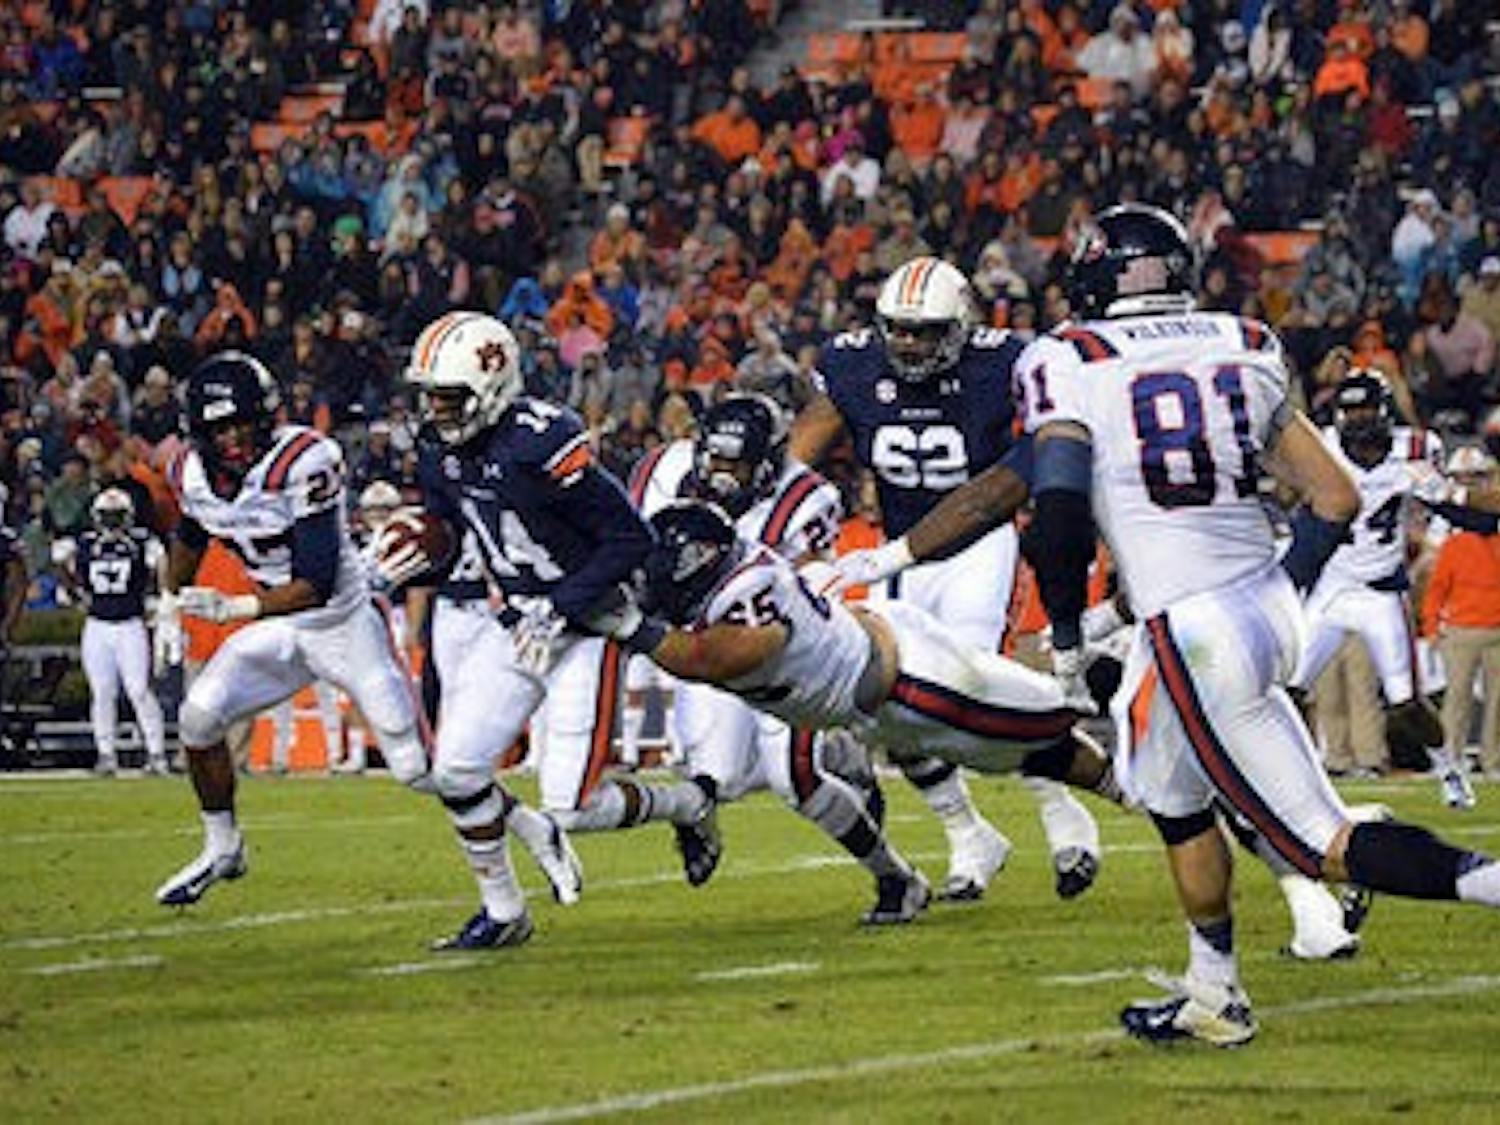 Nick Marshall #14 tackled by Samford's Jose Casanova #65 in the first half.